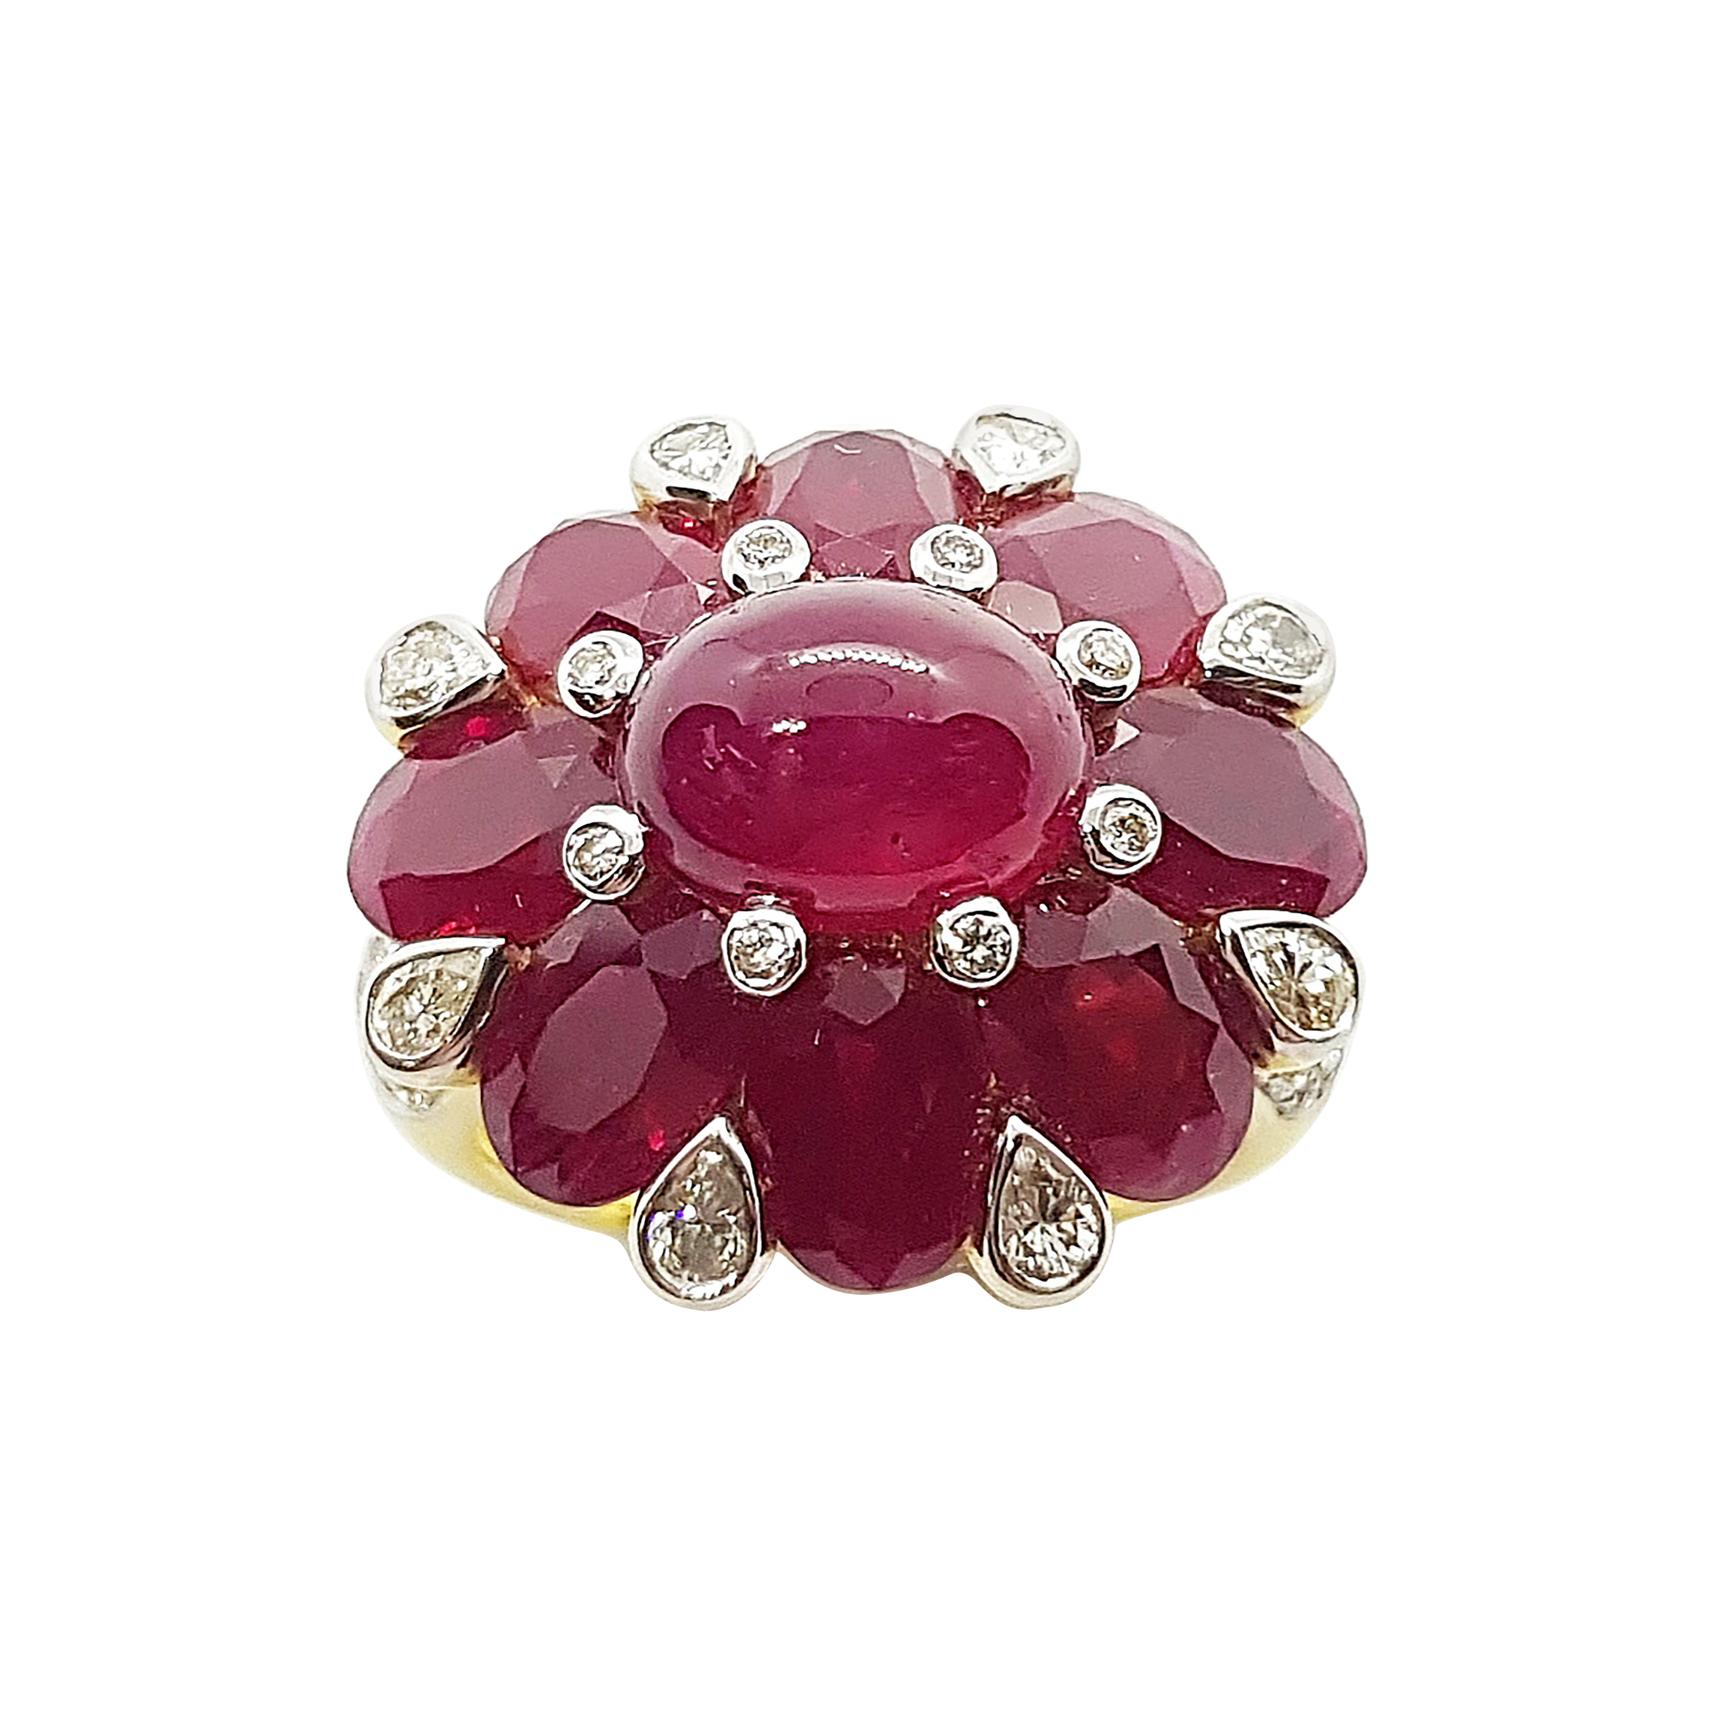 Cabochon Ruby, Ruby with Diamond Ring Set in 18 Karat Gold Settings